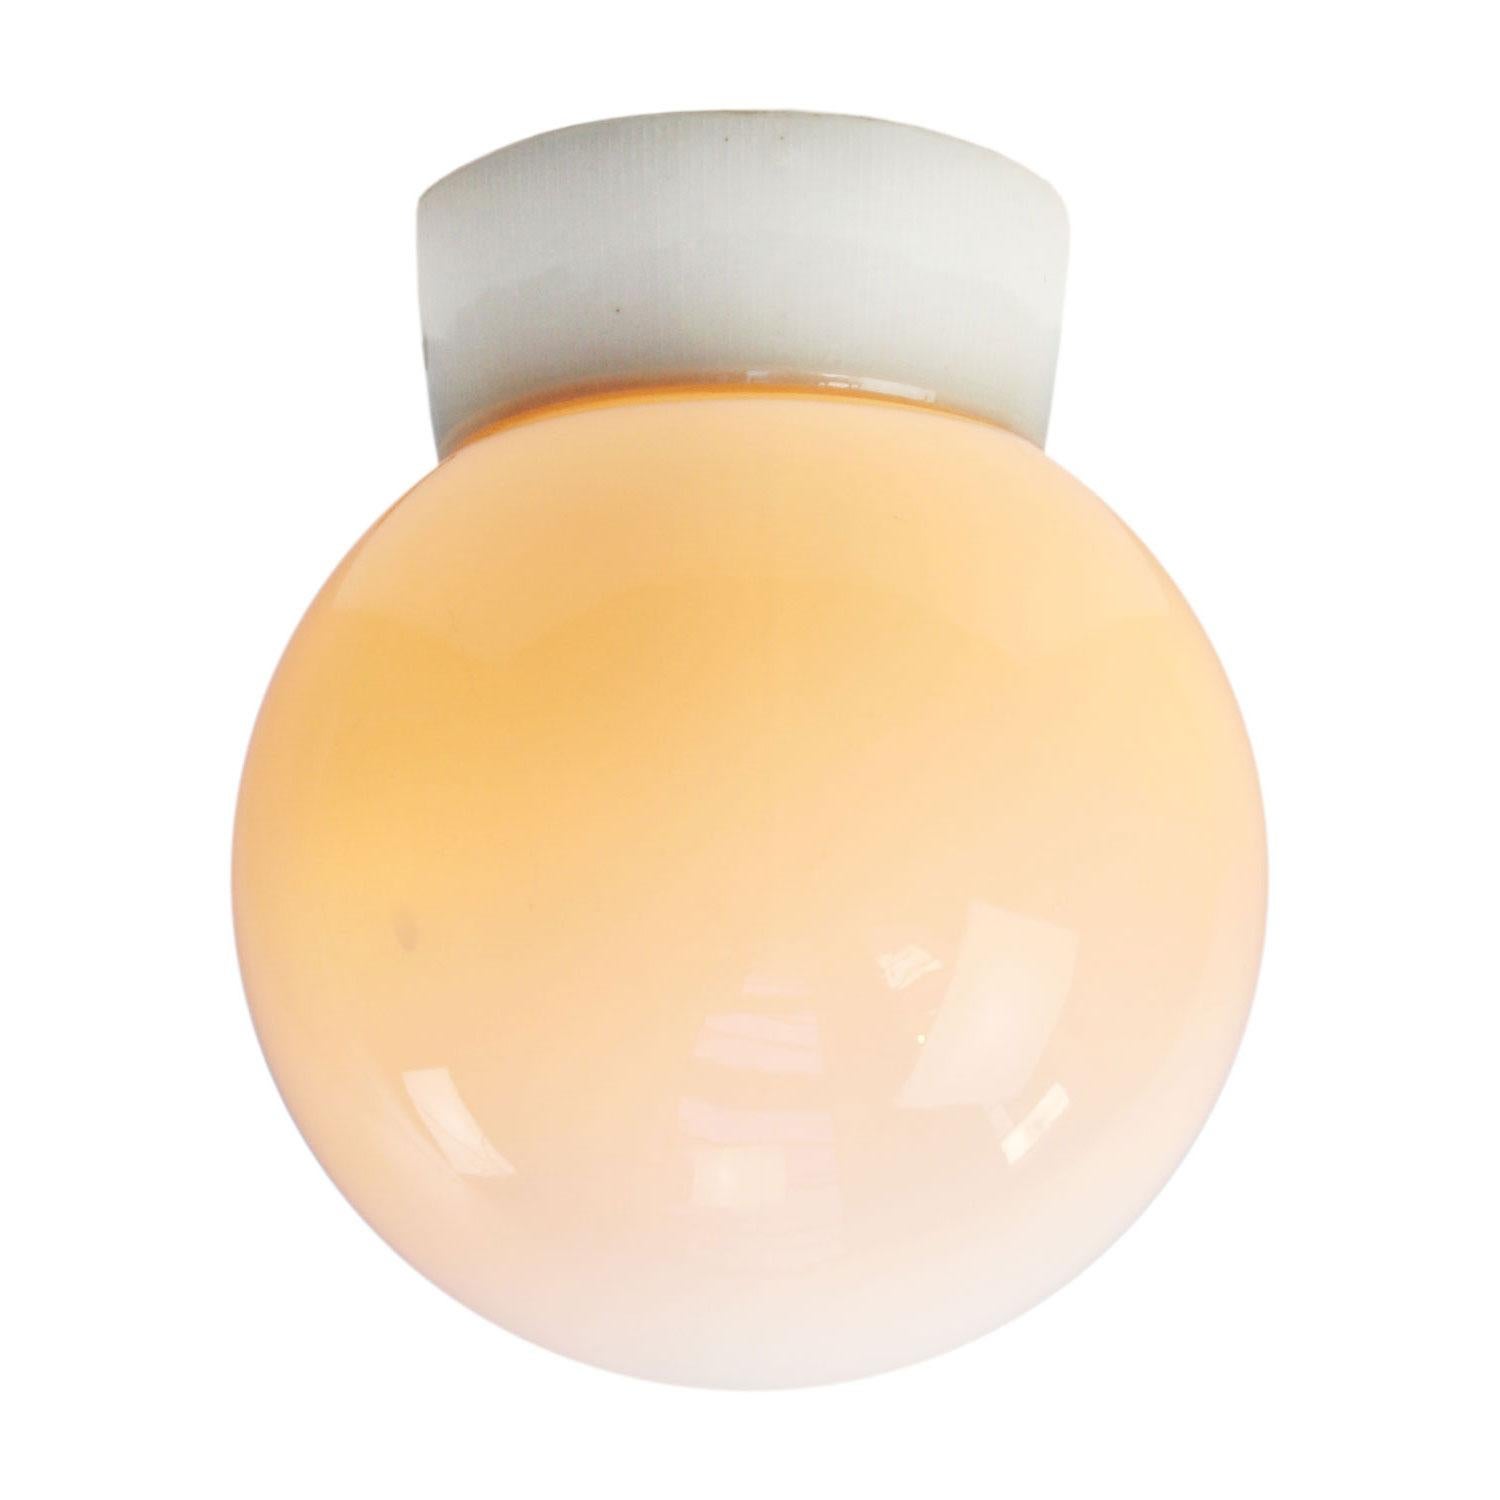 Industrial ceiling lamp.
White porcelain, white opaline glass.
2 conductors, no ground.
Diameter foot 12 cm

Weight: 1.30 kg / 2.9 lb

Priced per individual item. All lamps have been made suitable by international standards for incandescent light